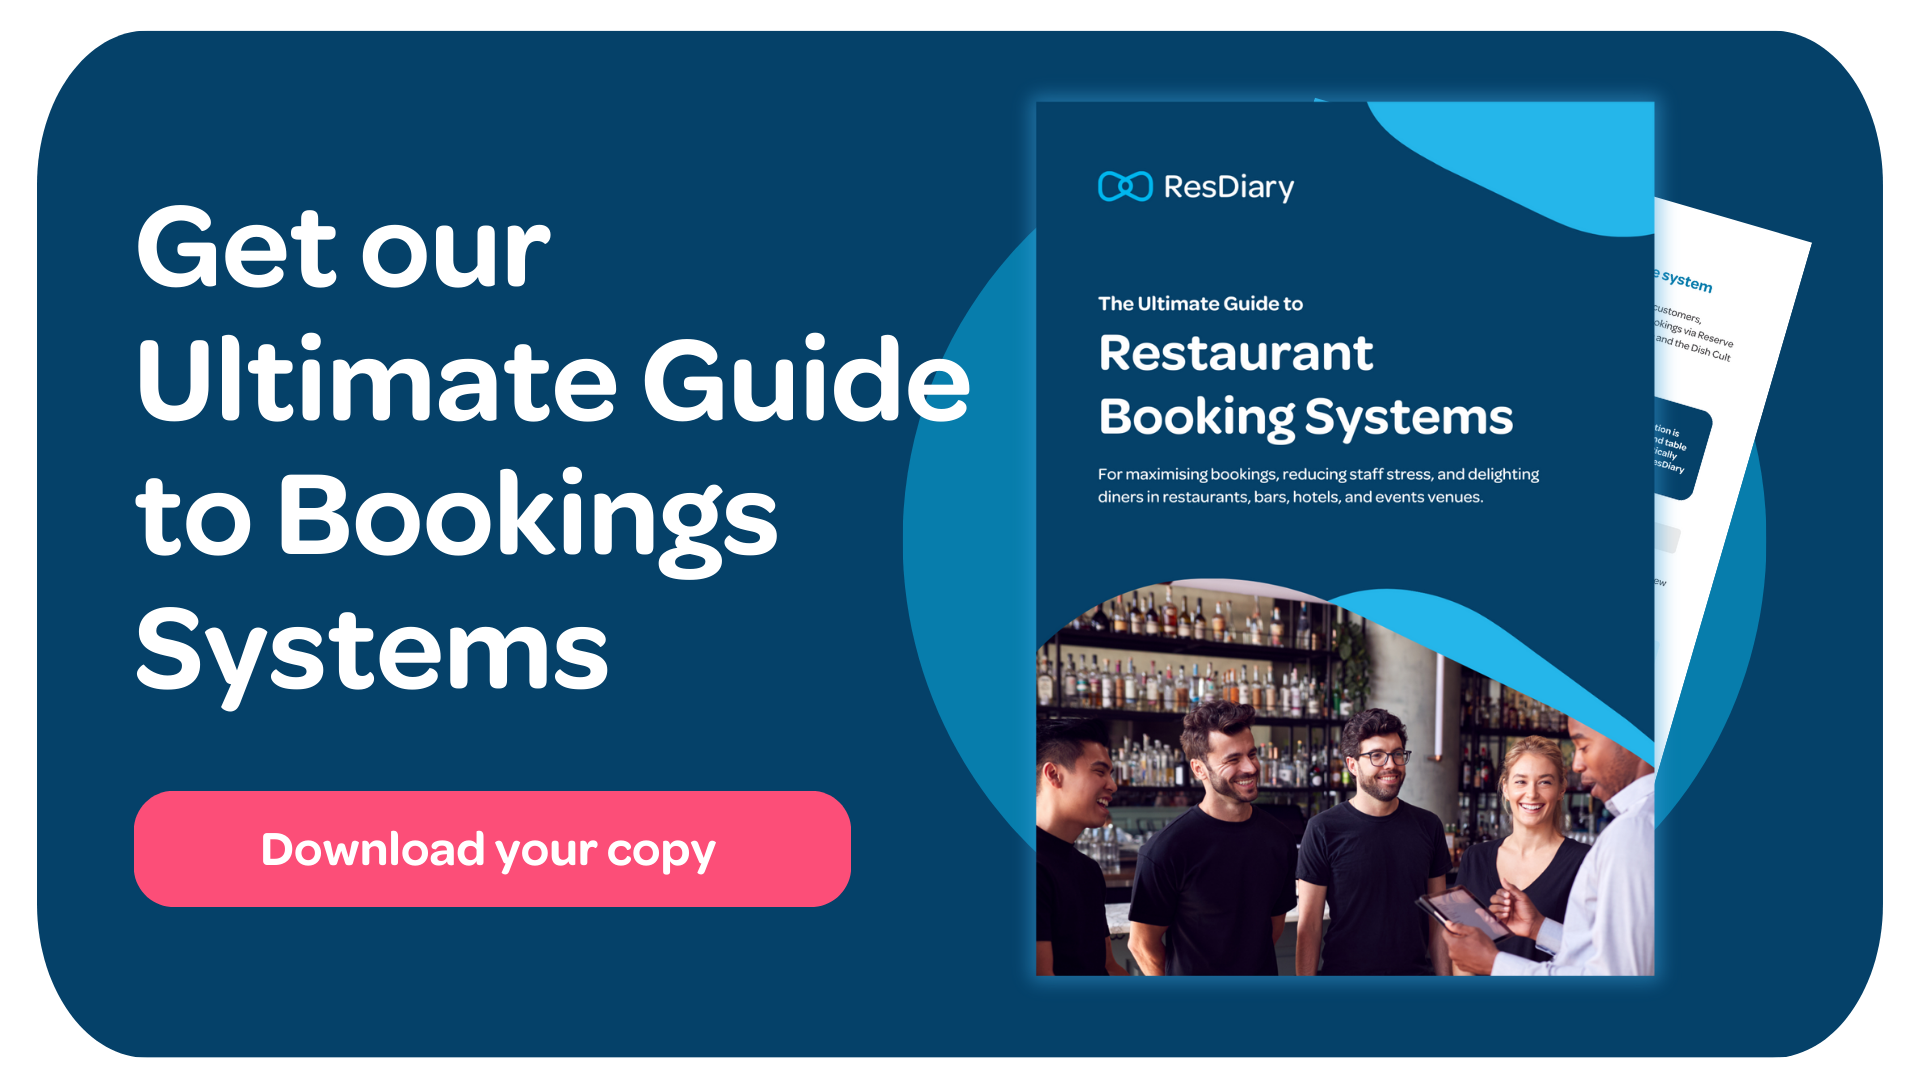 Download ResDiary's Ultimate Guide to Restaurant Booking Systems